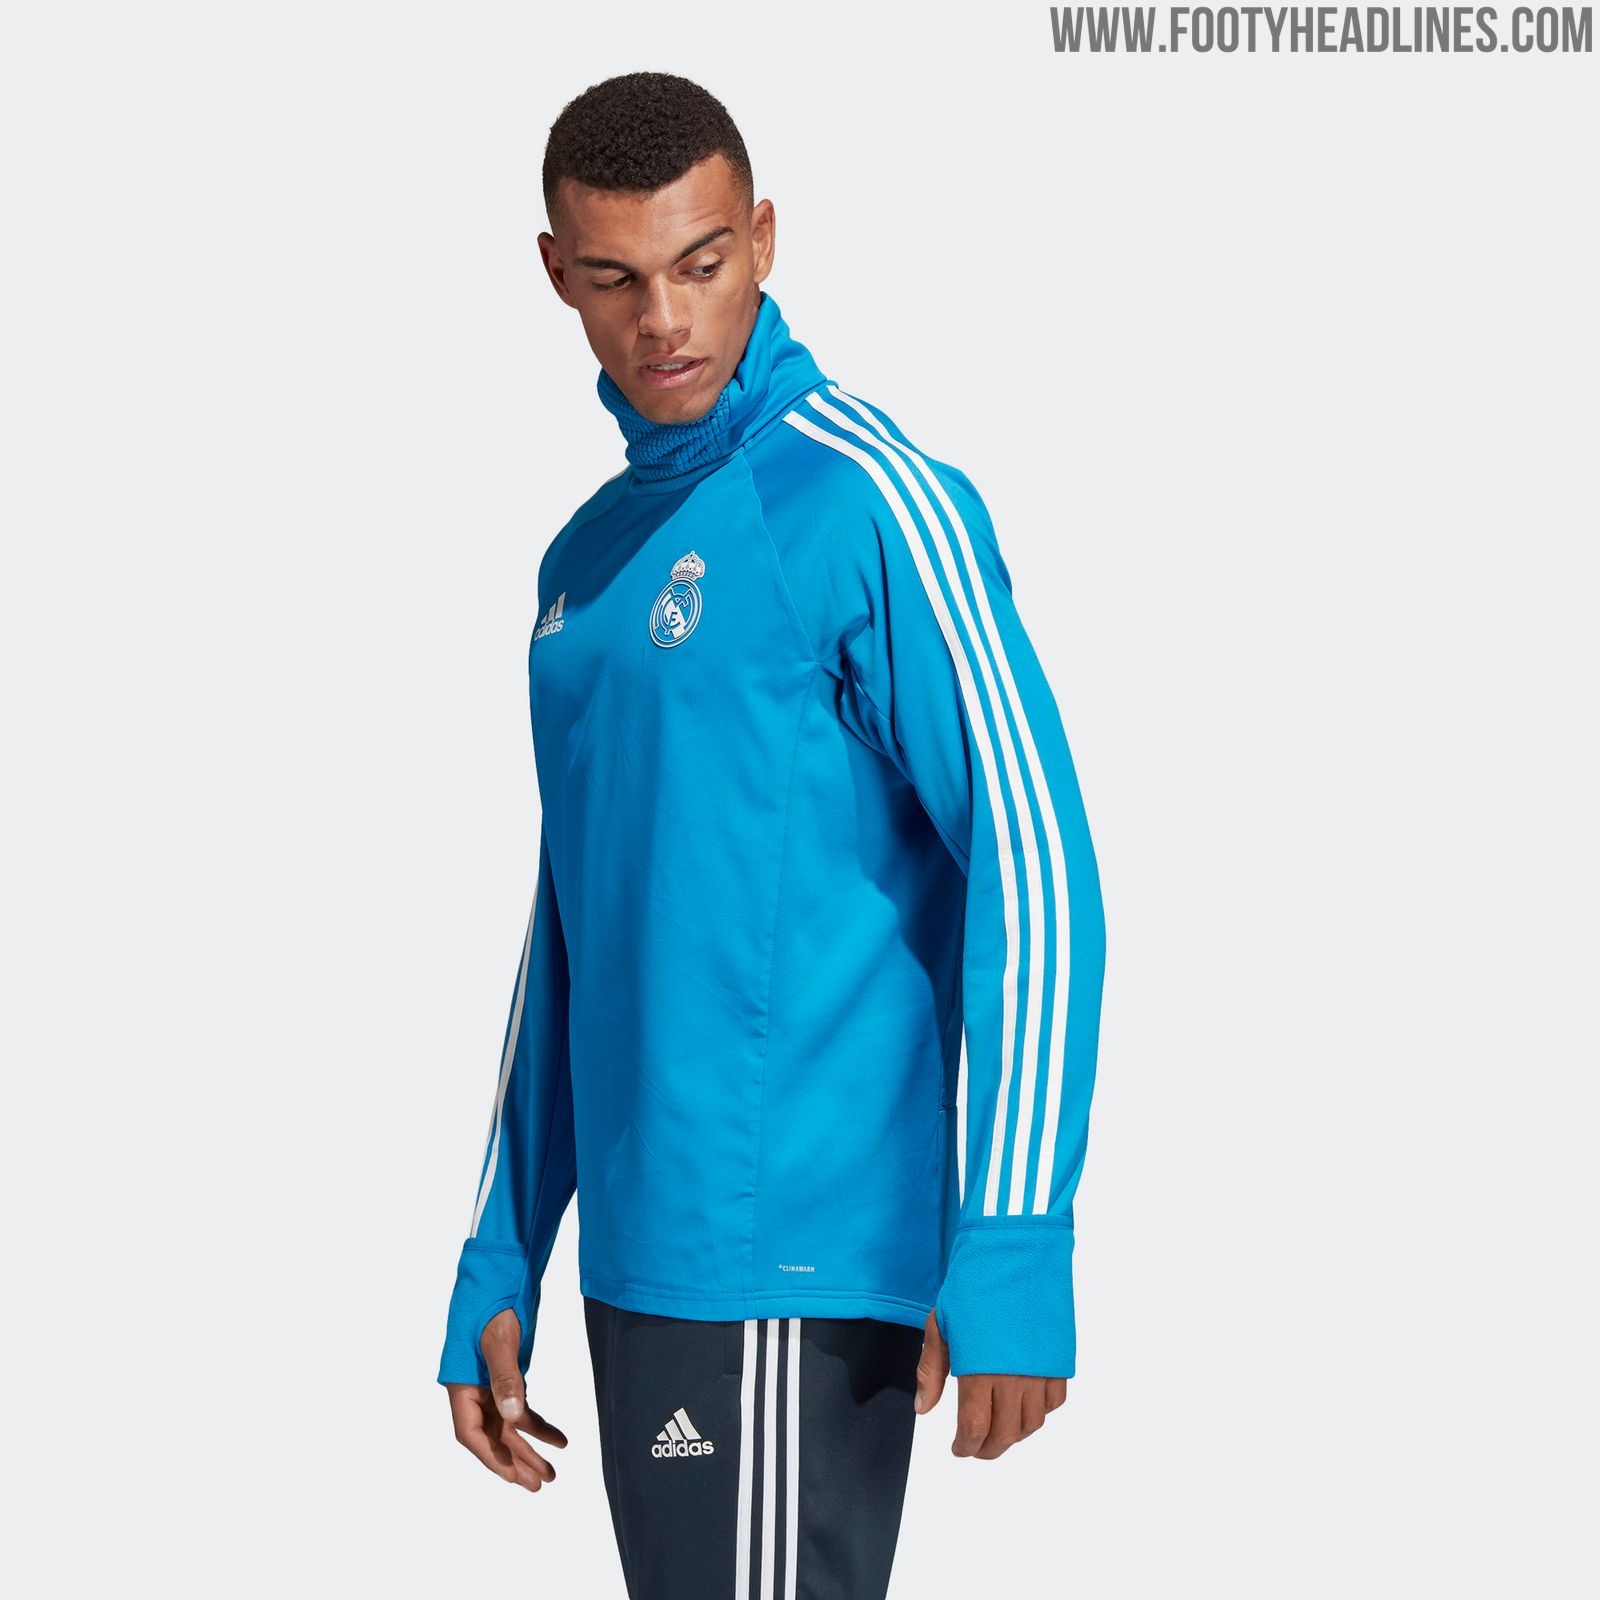 Real Madrid 2019 Training Collection Leaked - Footy Headlines